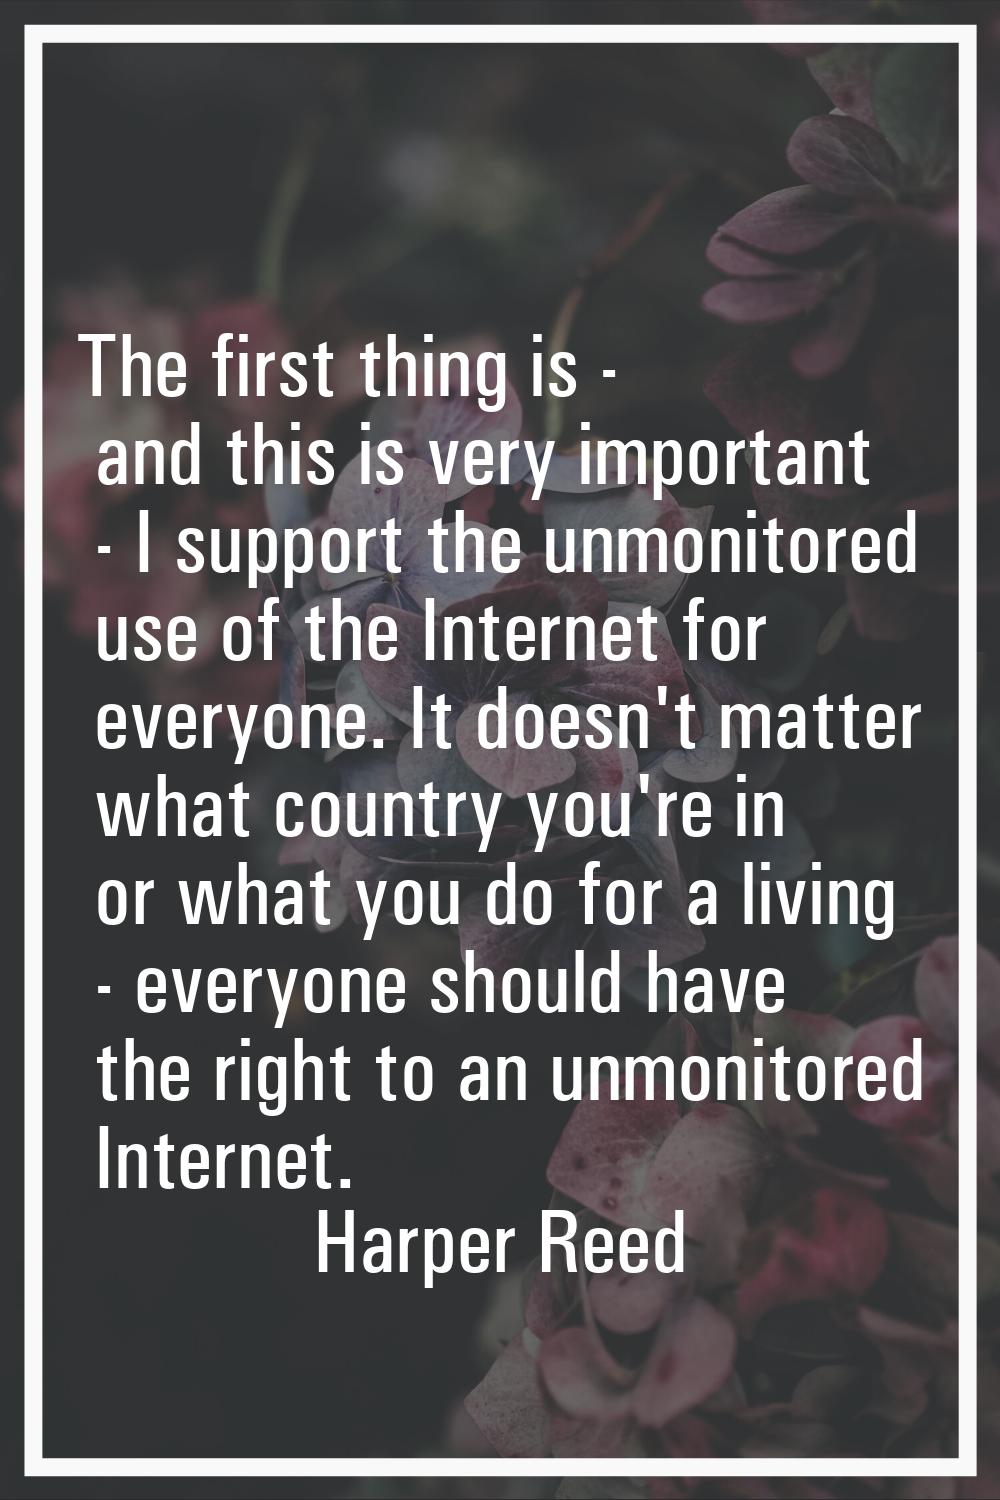 The first thing is - and this is very important - I support the unmonitored use of the Internet for